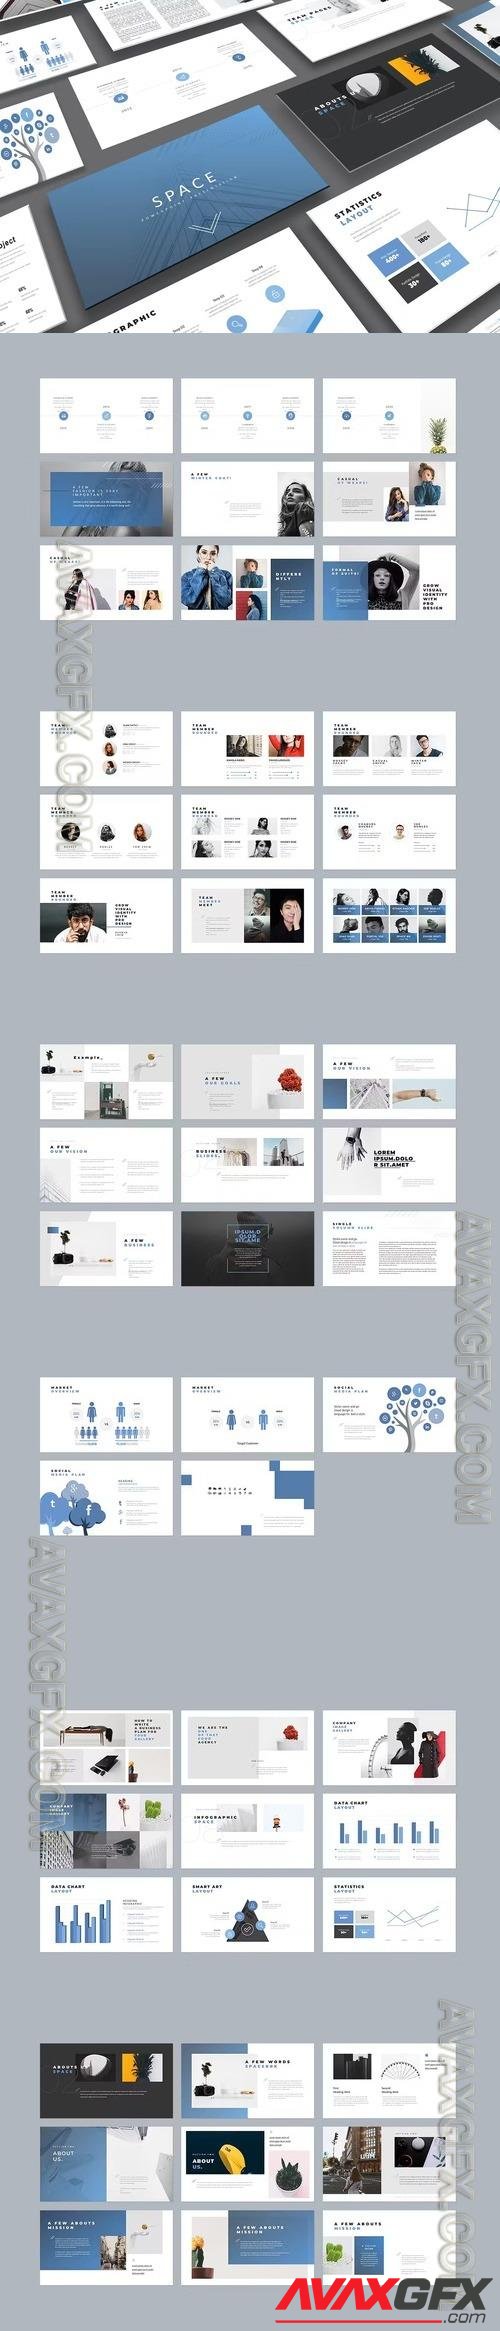 Space - PowerPoint Presentation Template